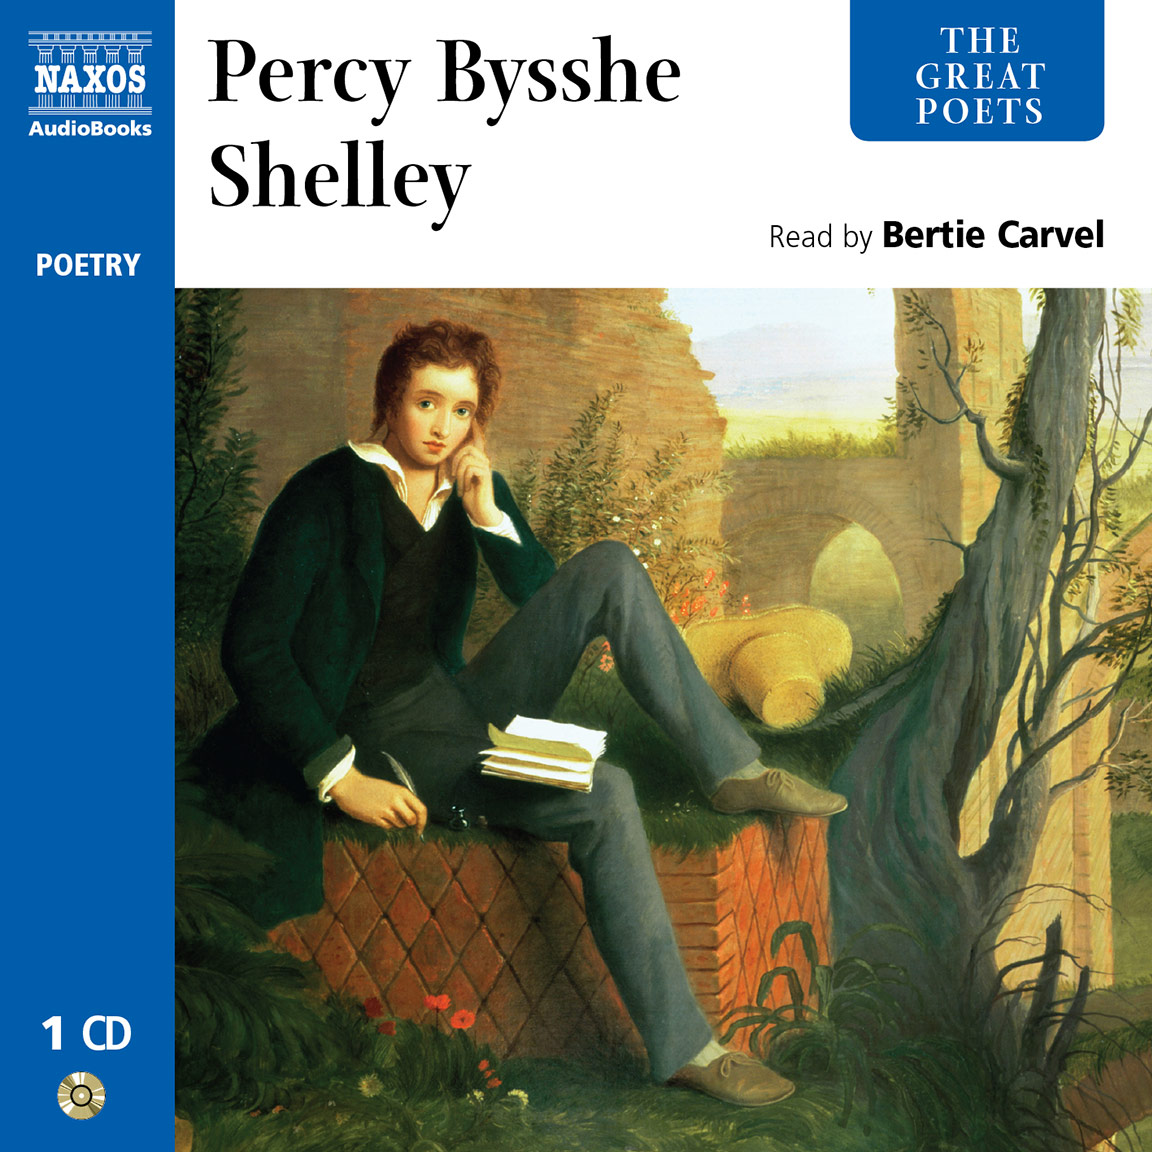 Percy Bysshe Shelley. Percy Bysshe Shelley и Байрон. Bysshe Shelley's book. Love's Philosophy by Percy Bysshe Shelley. Great poet